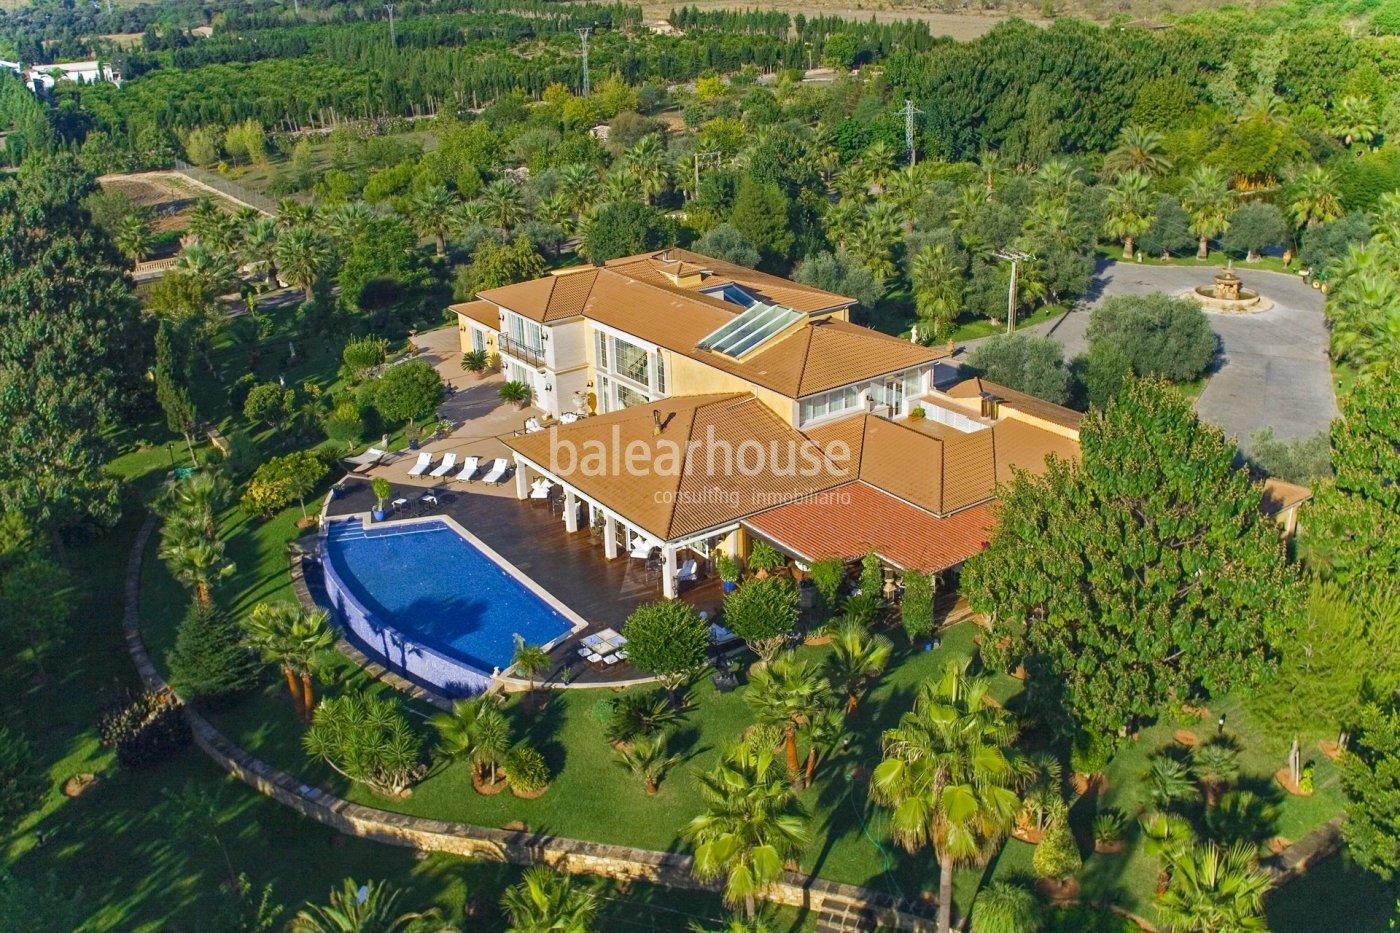 Impressive villa with noble architecture on a large plot of land surrounded by the green landscape.